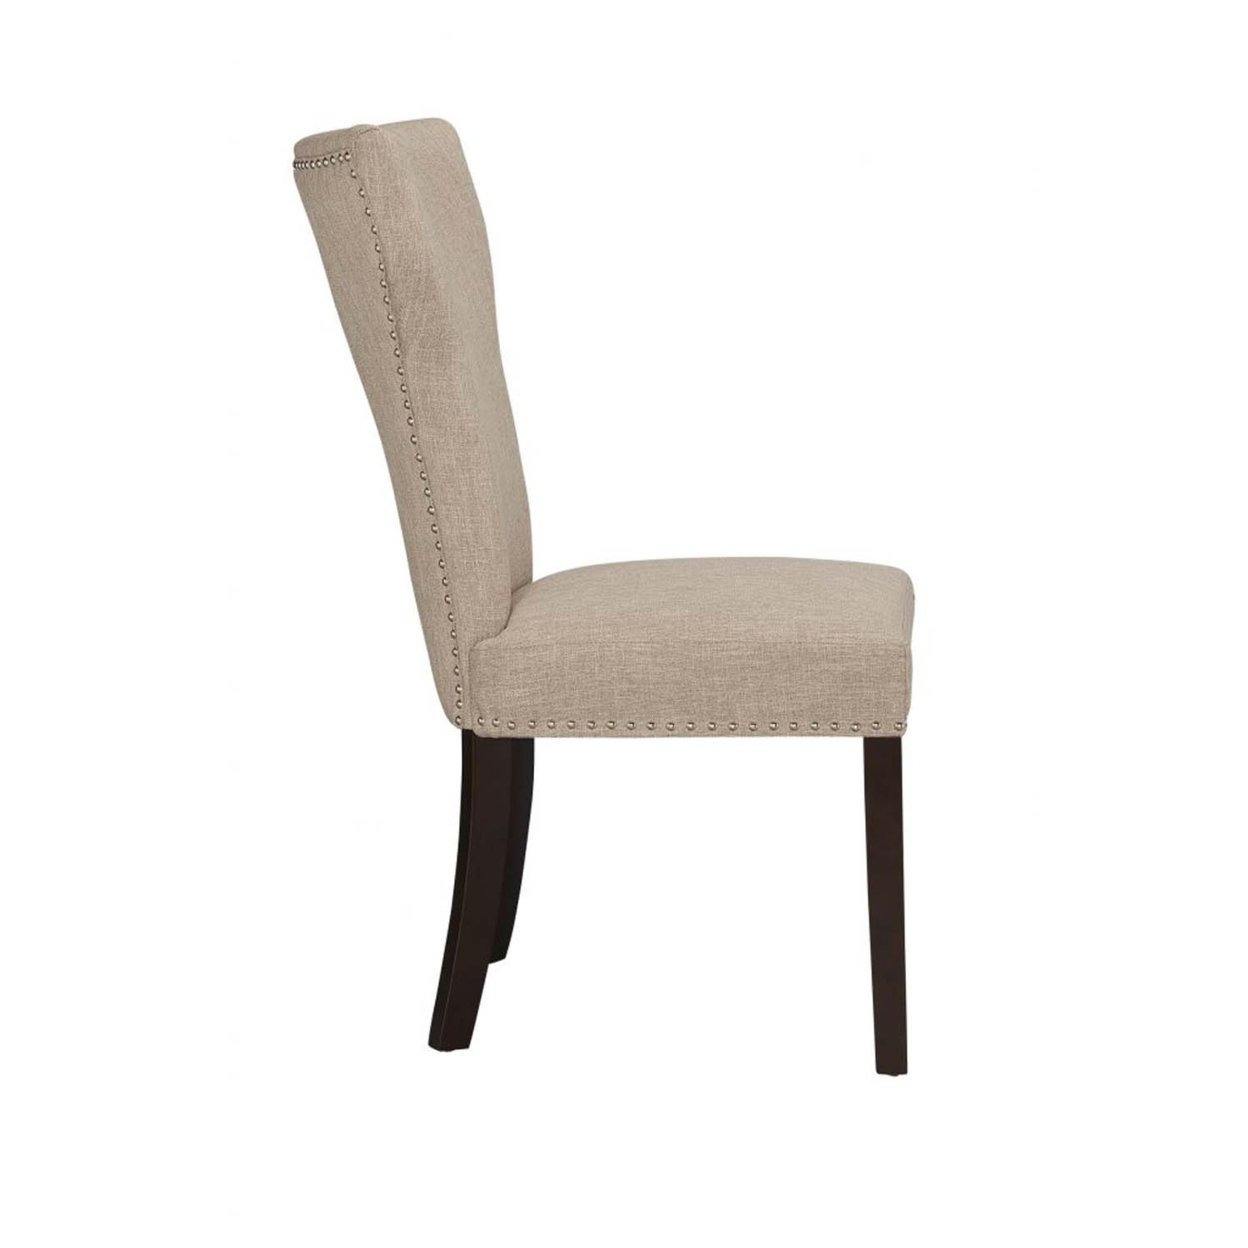 Fabric Upholstered Side Chair With Wingback Design, Set Of 2, Oatmeal Brown- Saltoro Sherpi